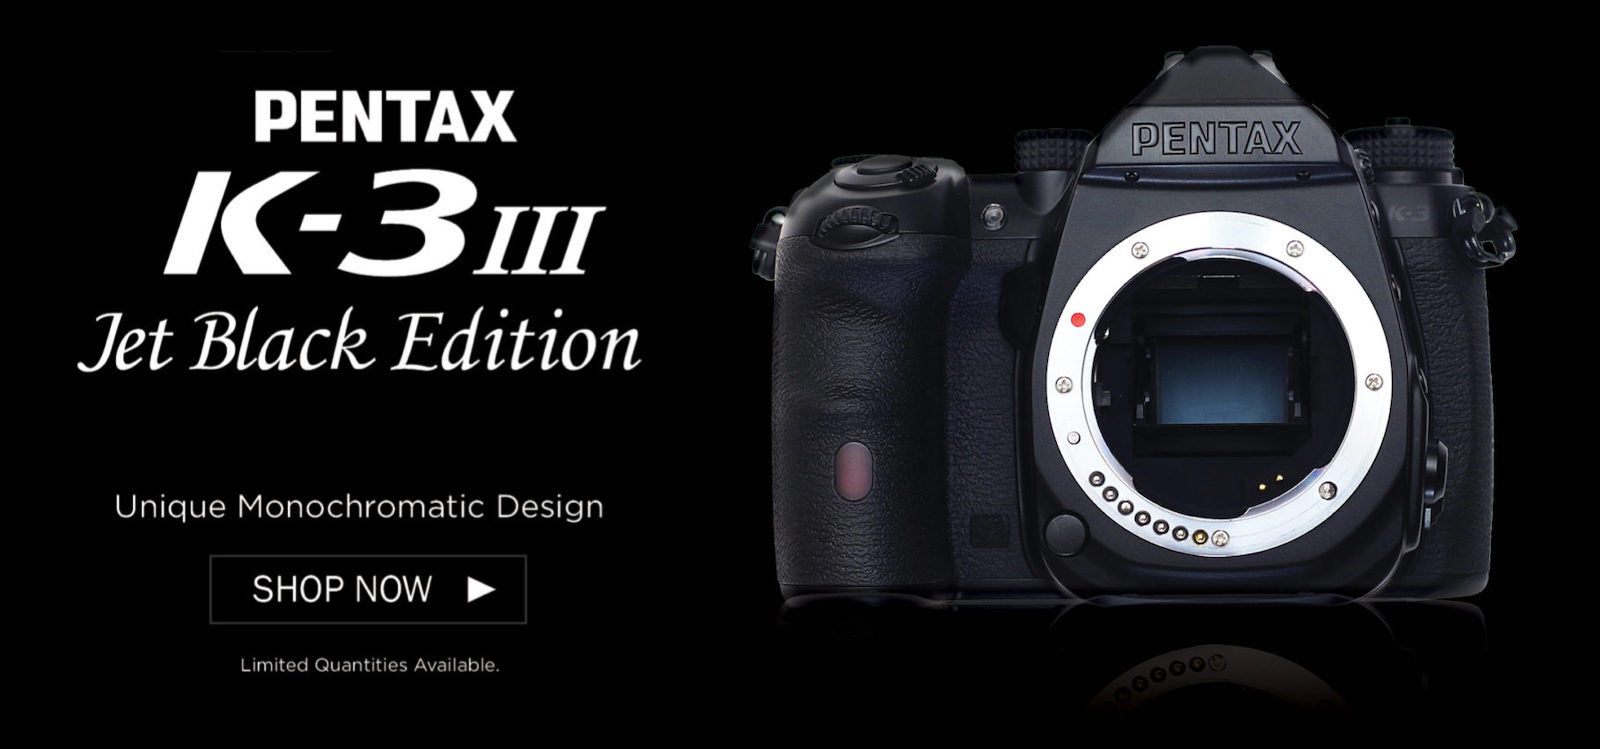 The crowdfunded Pentax K-3 Mark III Jet Black Edition camera is now  available for purchase in the US (limited quantities available) - Pentax   Ricoh Rumors